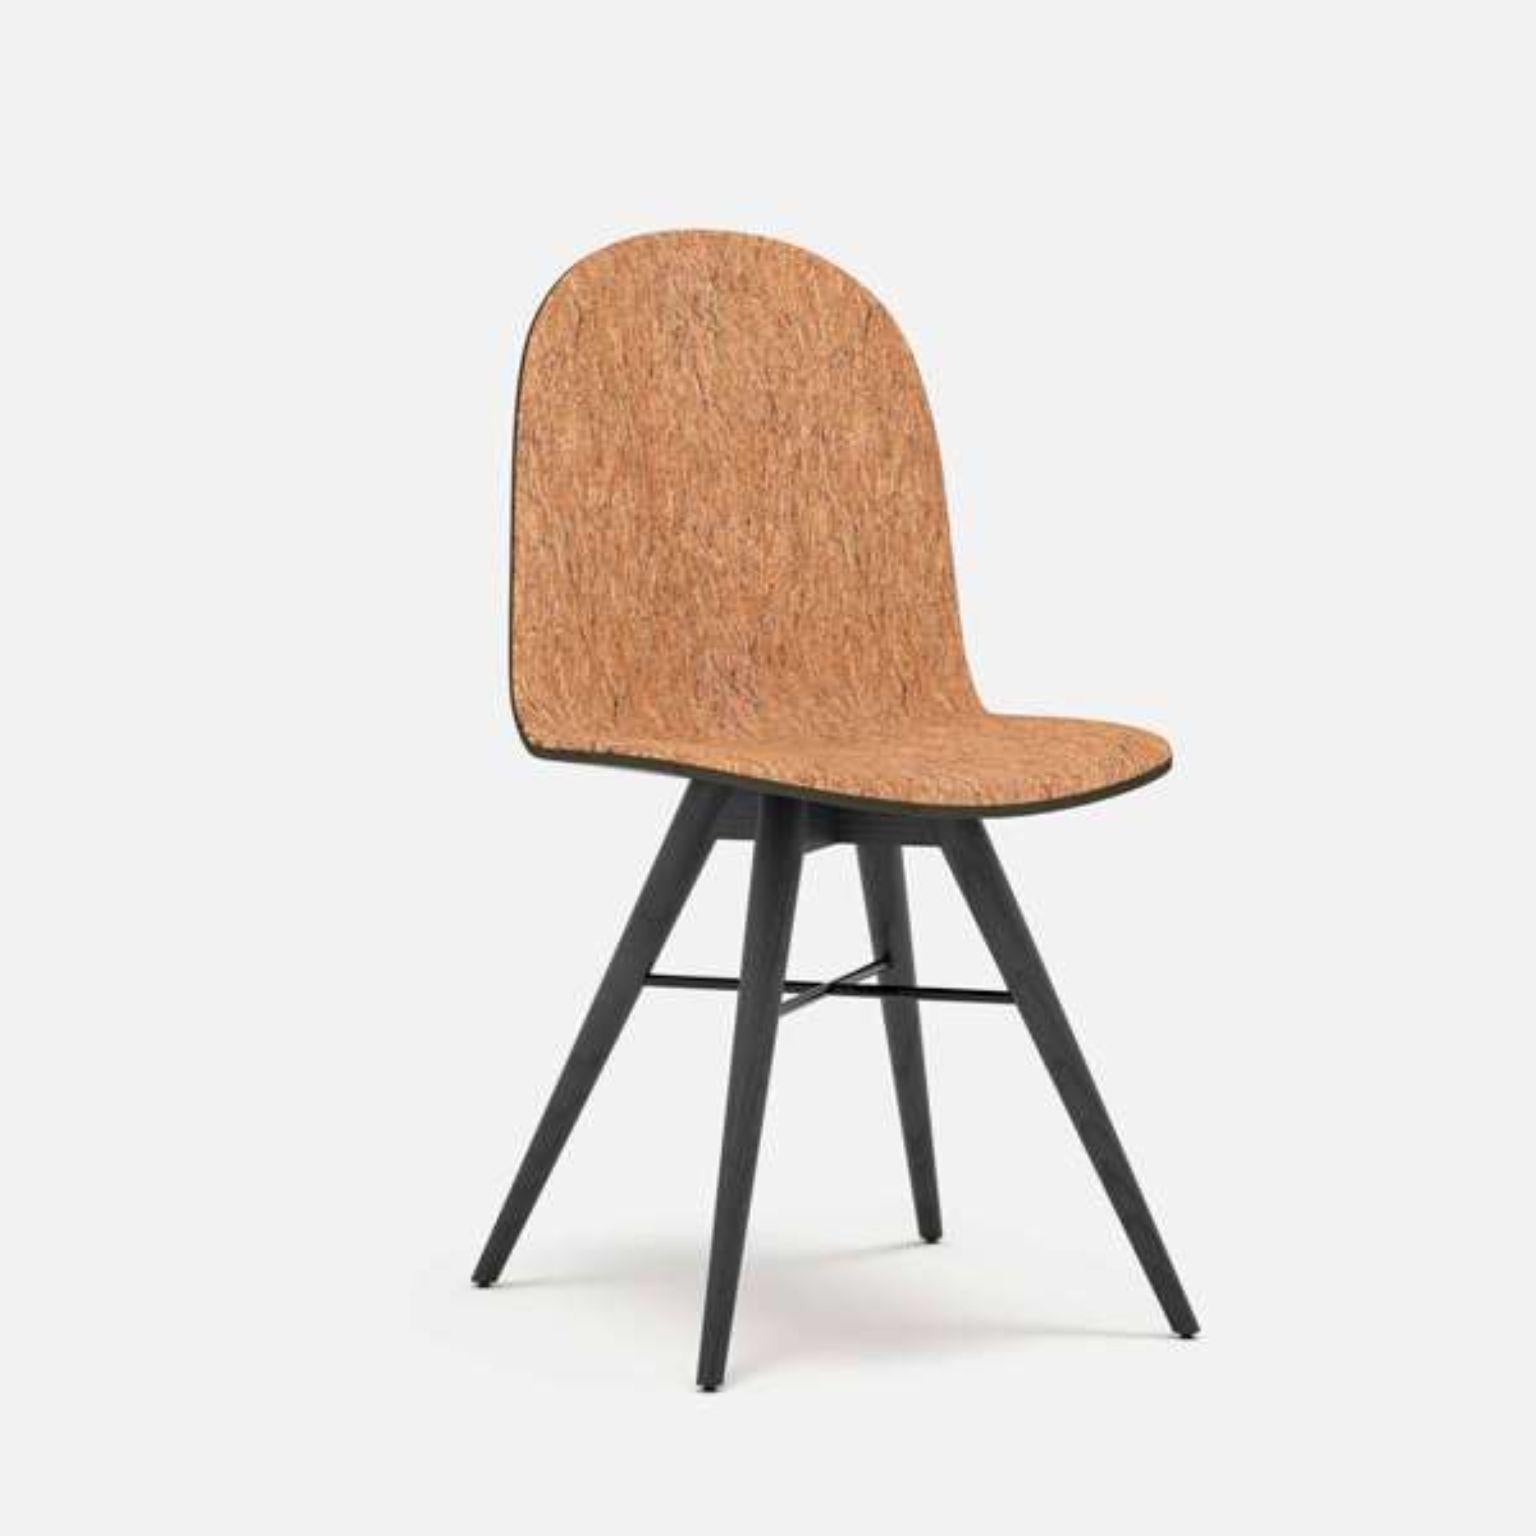 Organic Modern Walnut and Corkfabric Contemporary Chair by Alexandre Caldas For Sale